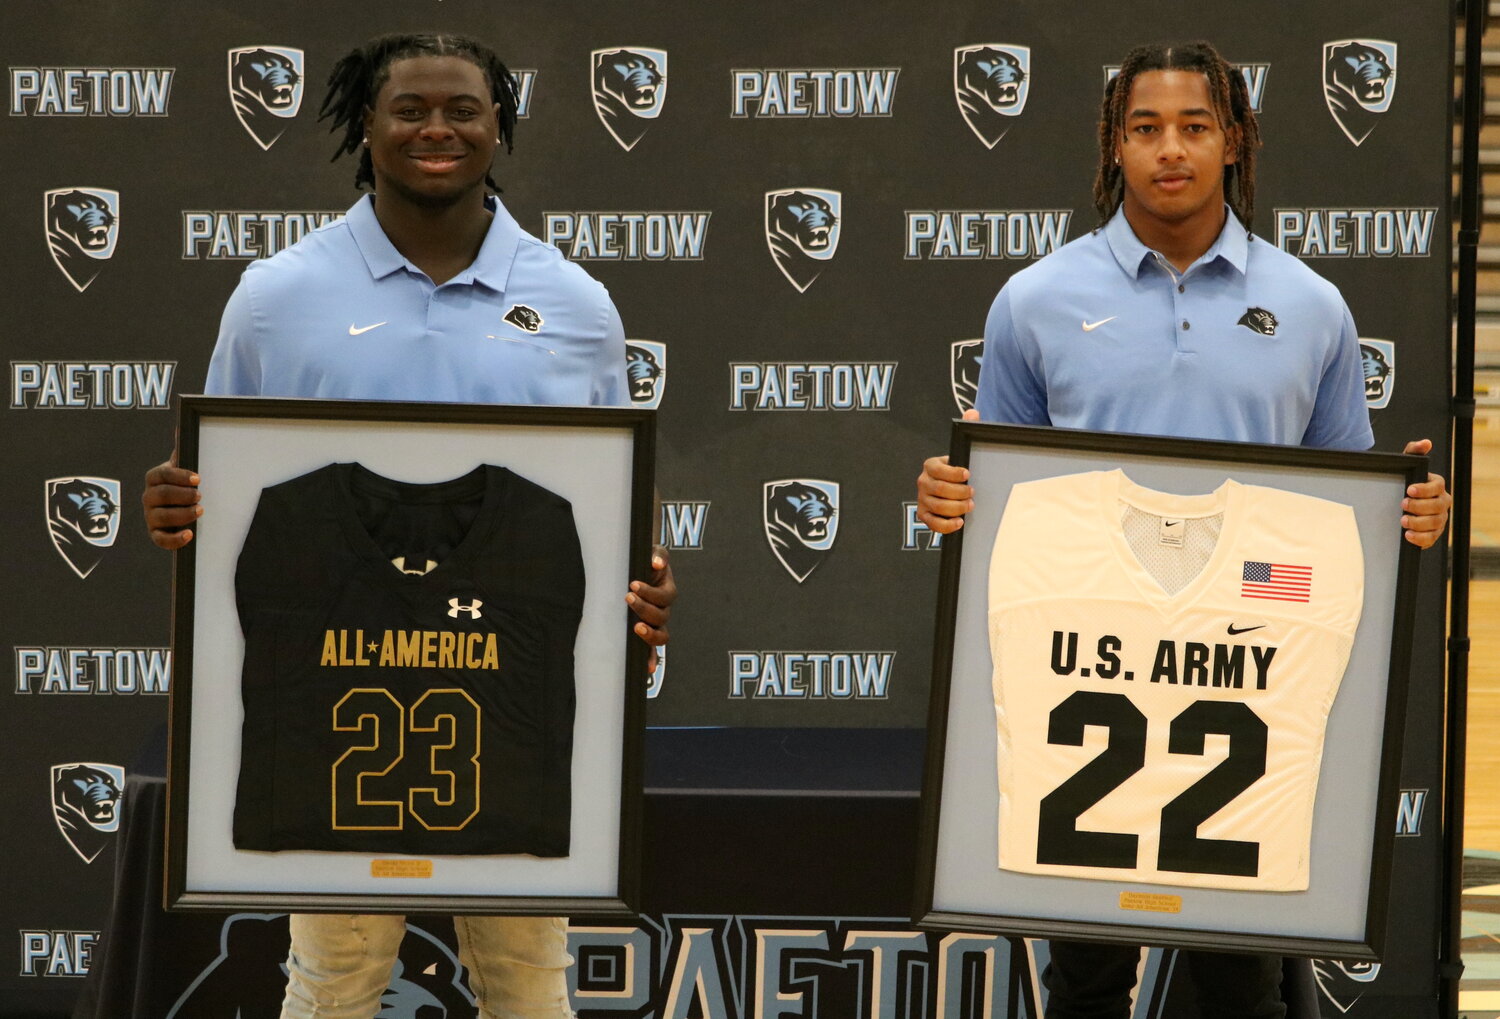 D.J. Hicks and Daymion Sanford were presented with frames of their All-American jersey's.